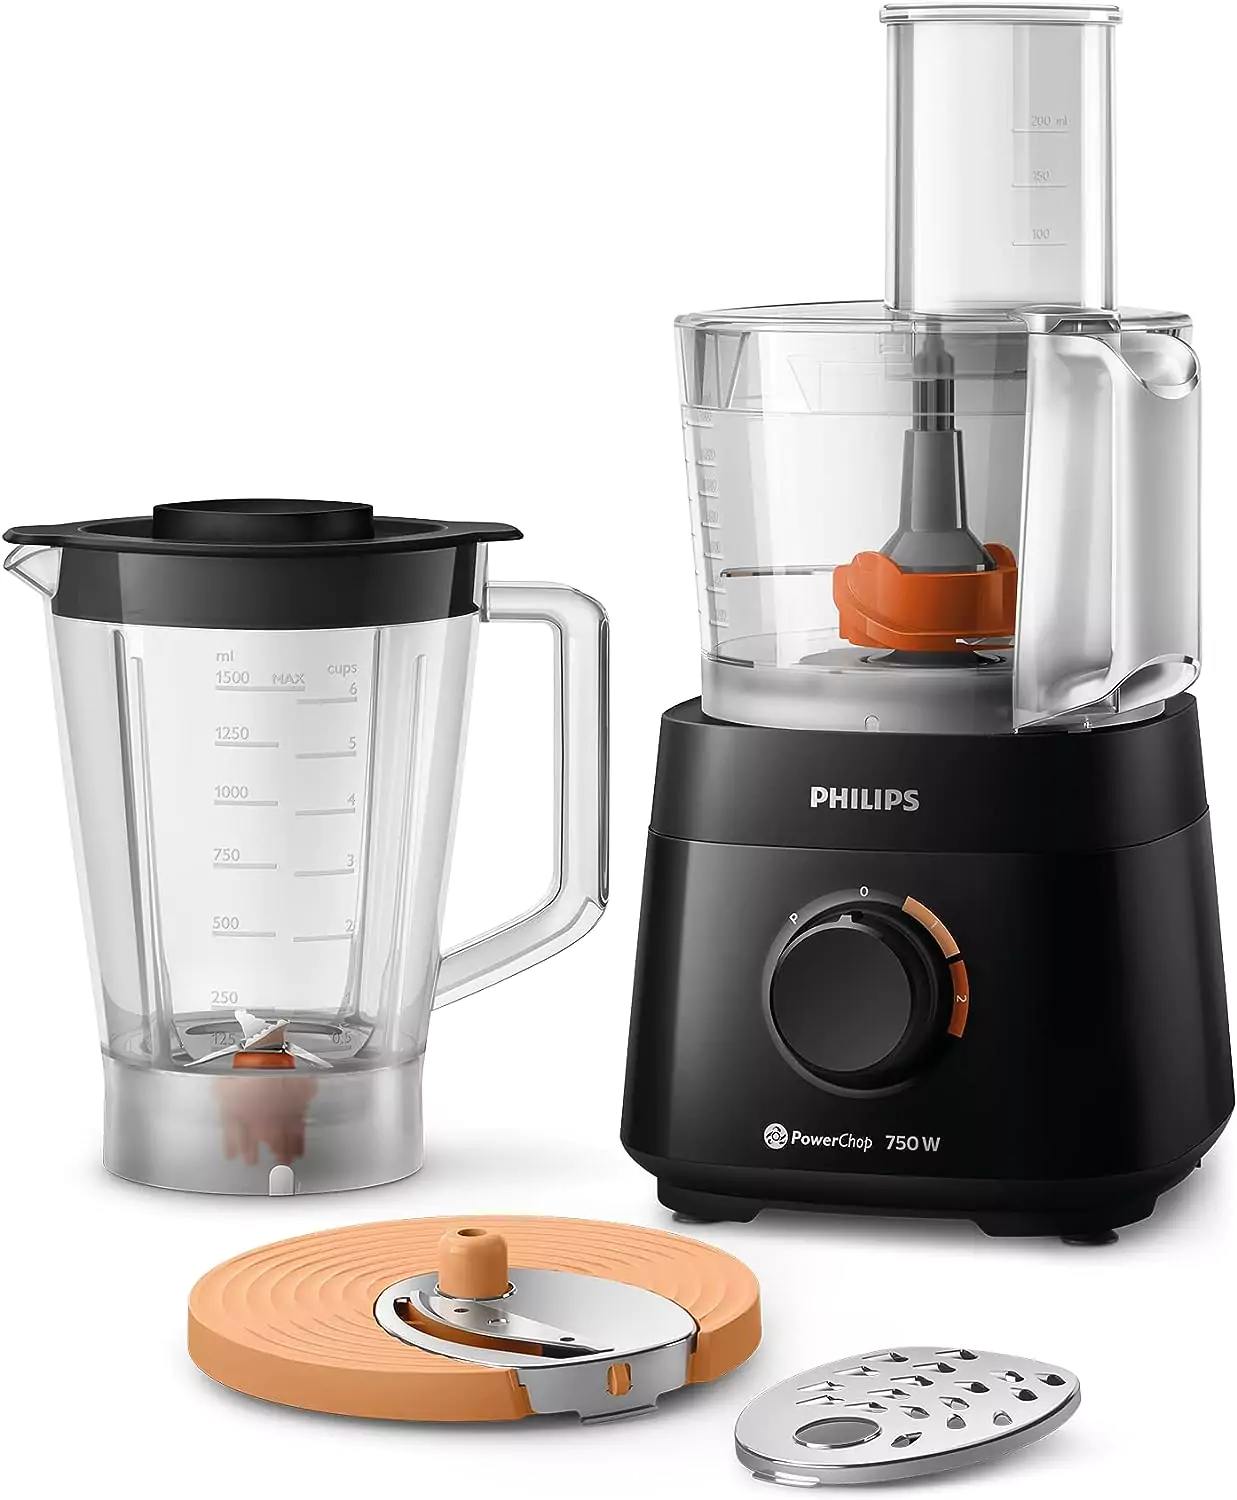 Philips HR7301 Multi-Processor Food Processor (750W, 4 in 1) Kitchen Blender, Processor and Blender with Grating Disc and Chopping Disc Included